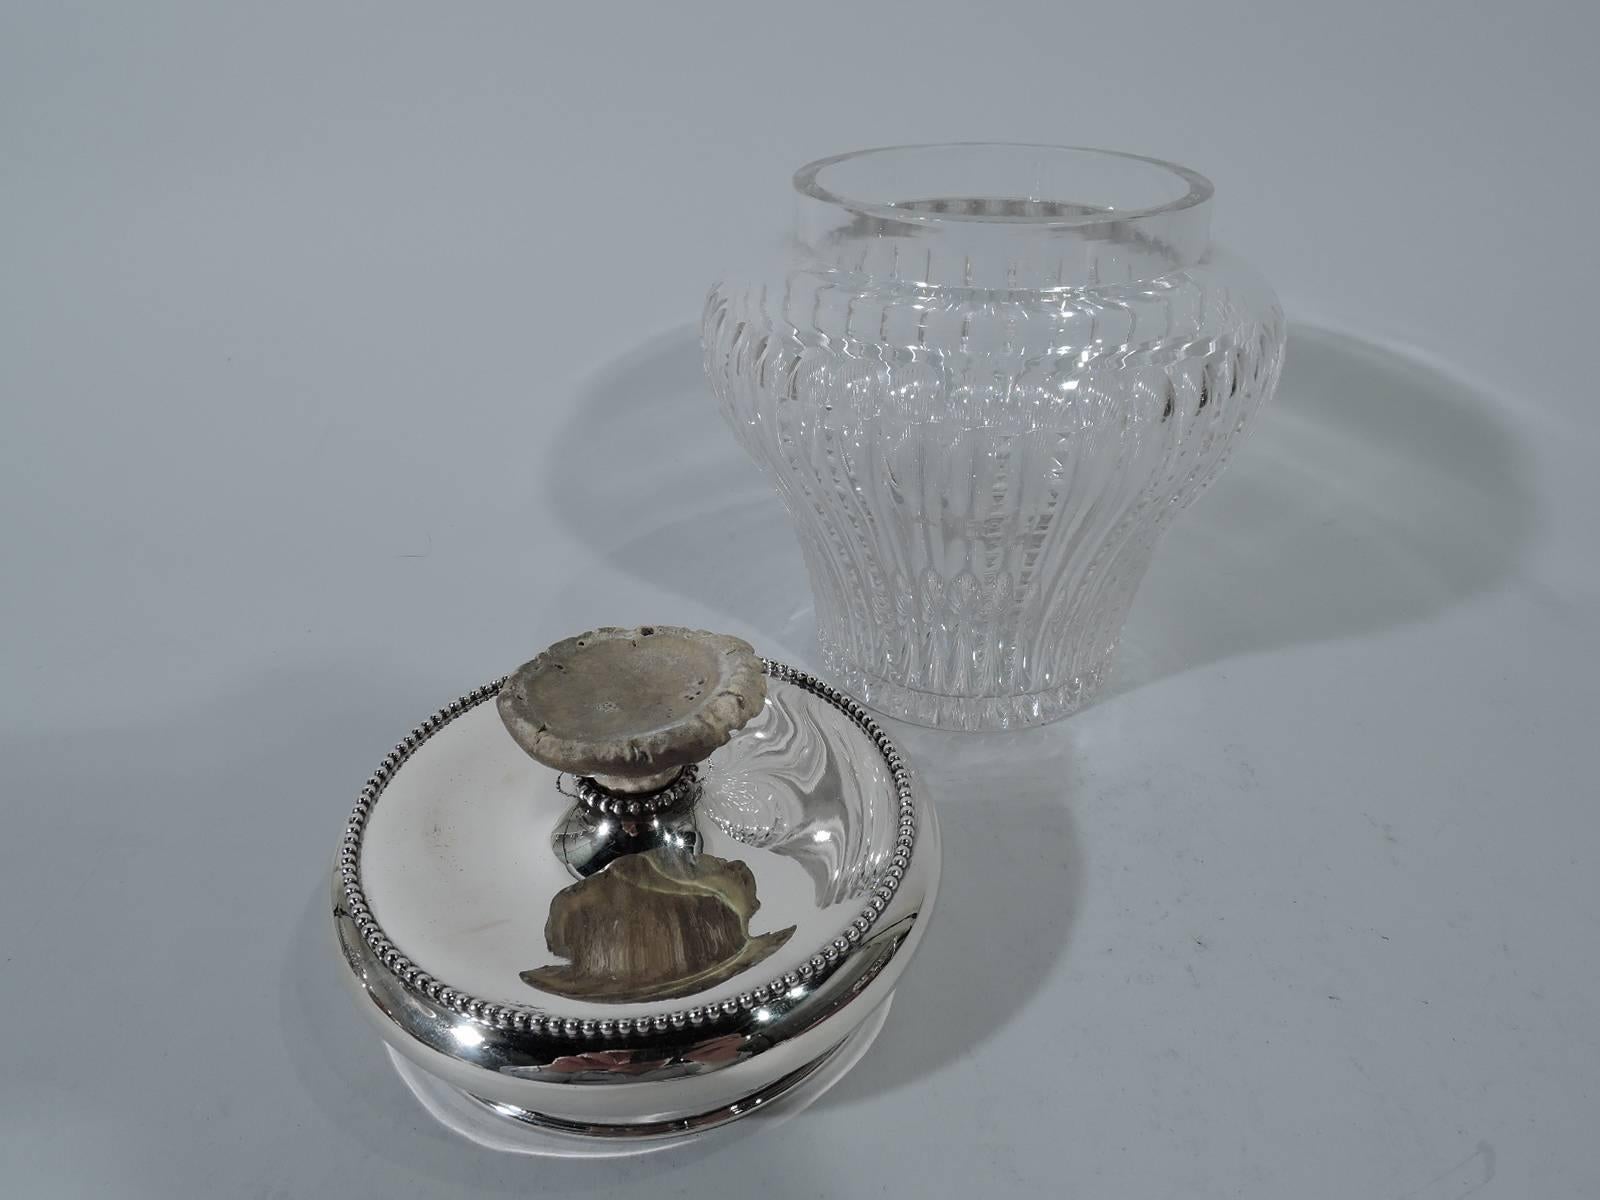 Edwardian cut-glass tobacco jar with sterling silver cover. Made by Redlich & Co. in New York. Jar ovoid with three plain flutes alternating with one notched flute and underside star. Cover has bellied sides and flat top with applied beading and